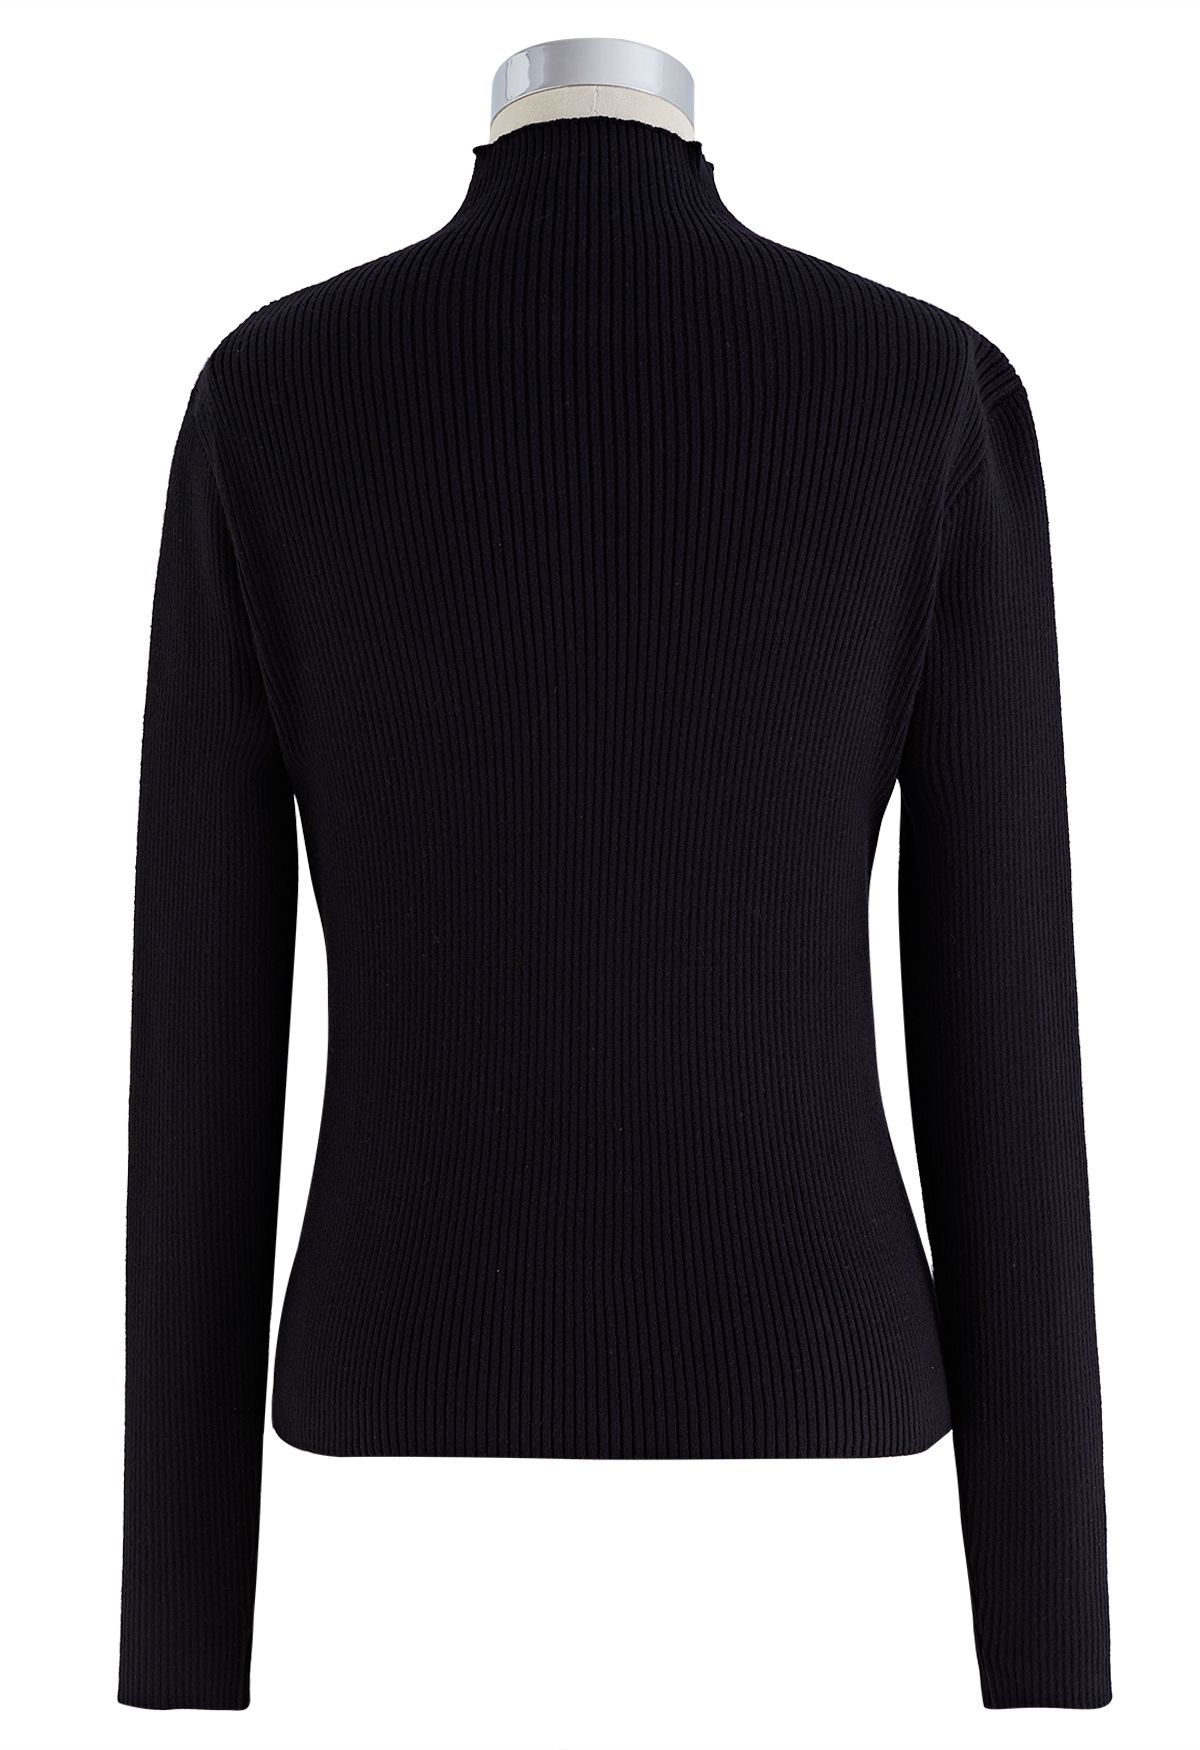 Crystal Trim Cutout High Neck Knit Top in Black